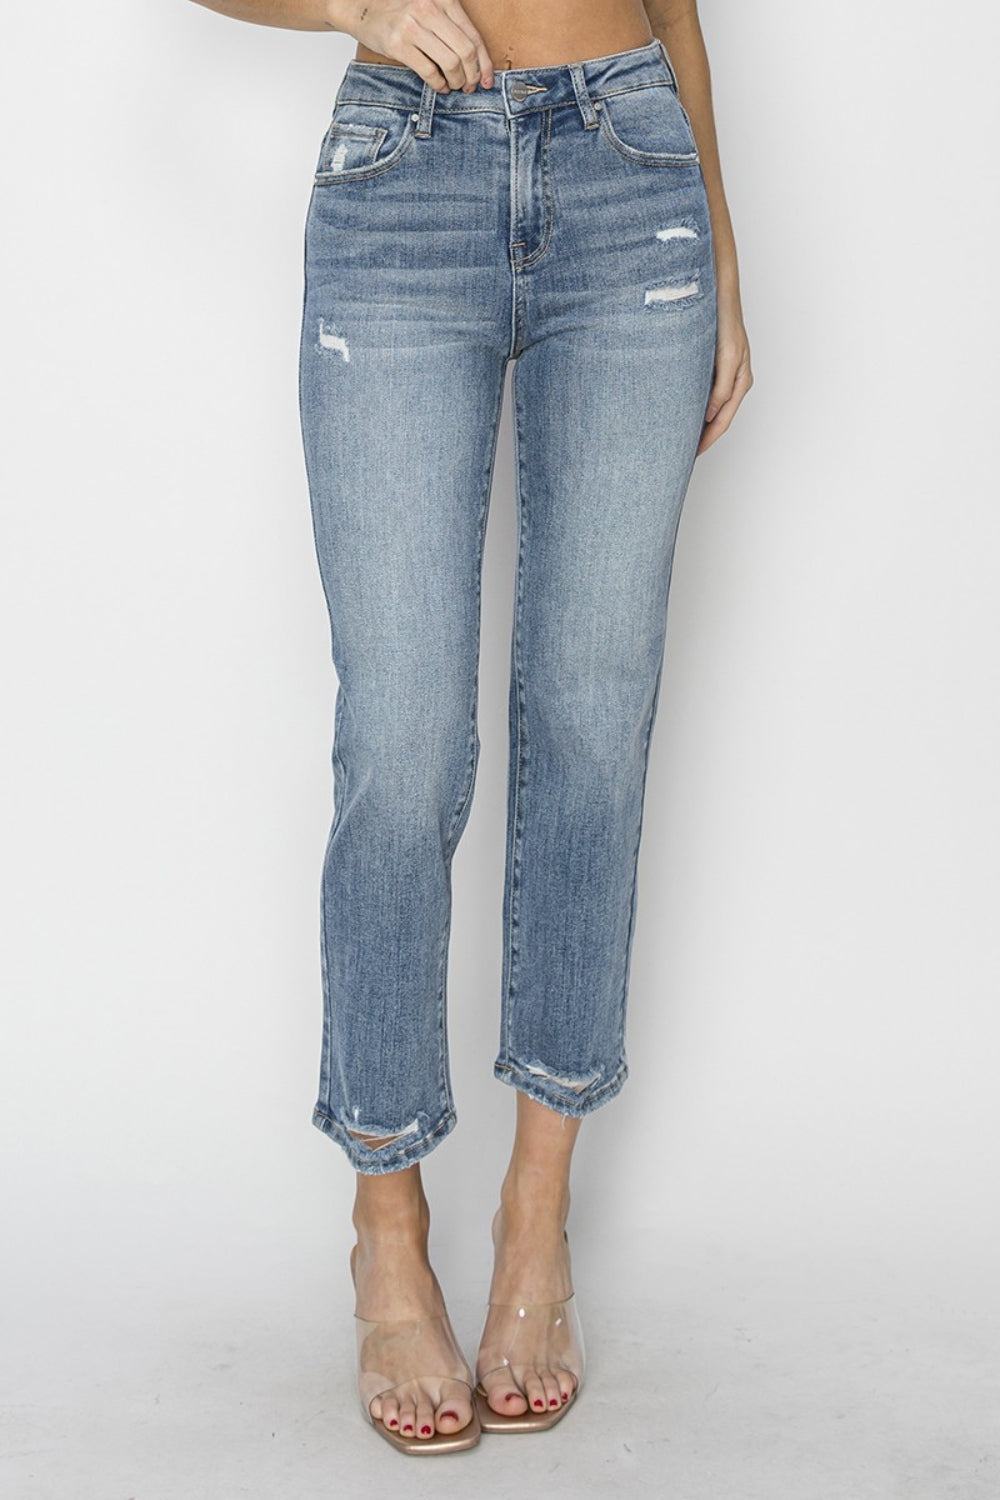 The High Waist Distressed Cropped Jeans are a trendy and edgy addition to your denim collection. The high waist design offers a flattering and on-trend silhouette. The distressed detailing adds a cool and rugged vibe to the cropped jeans. 